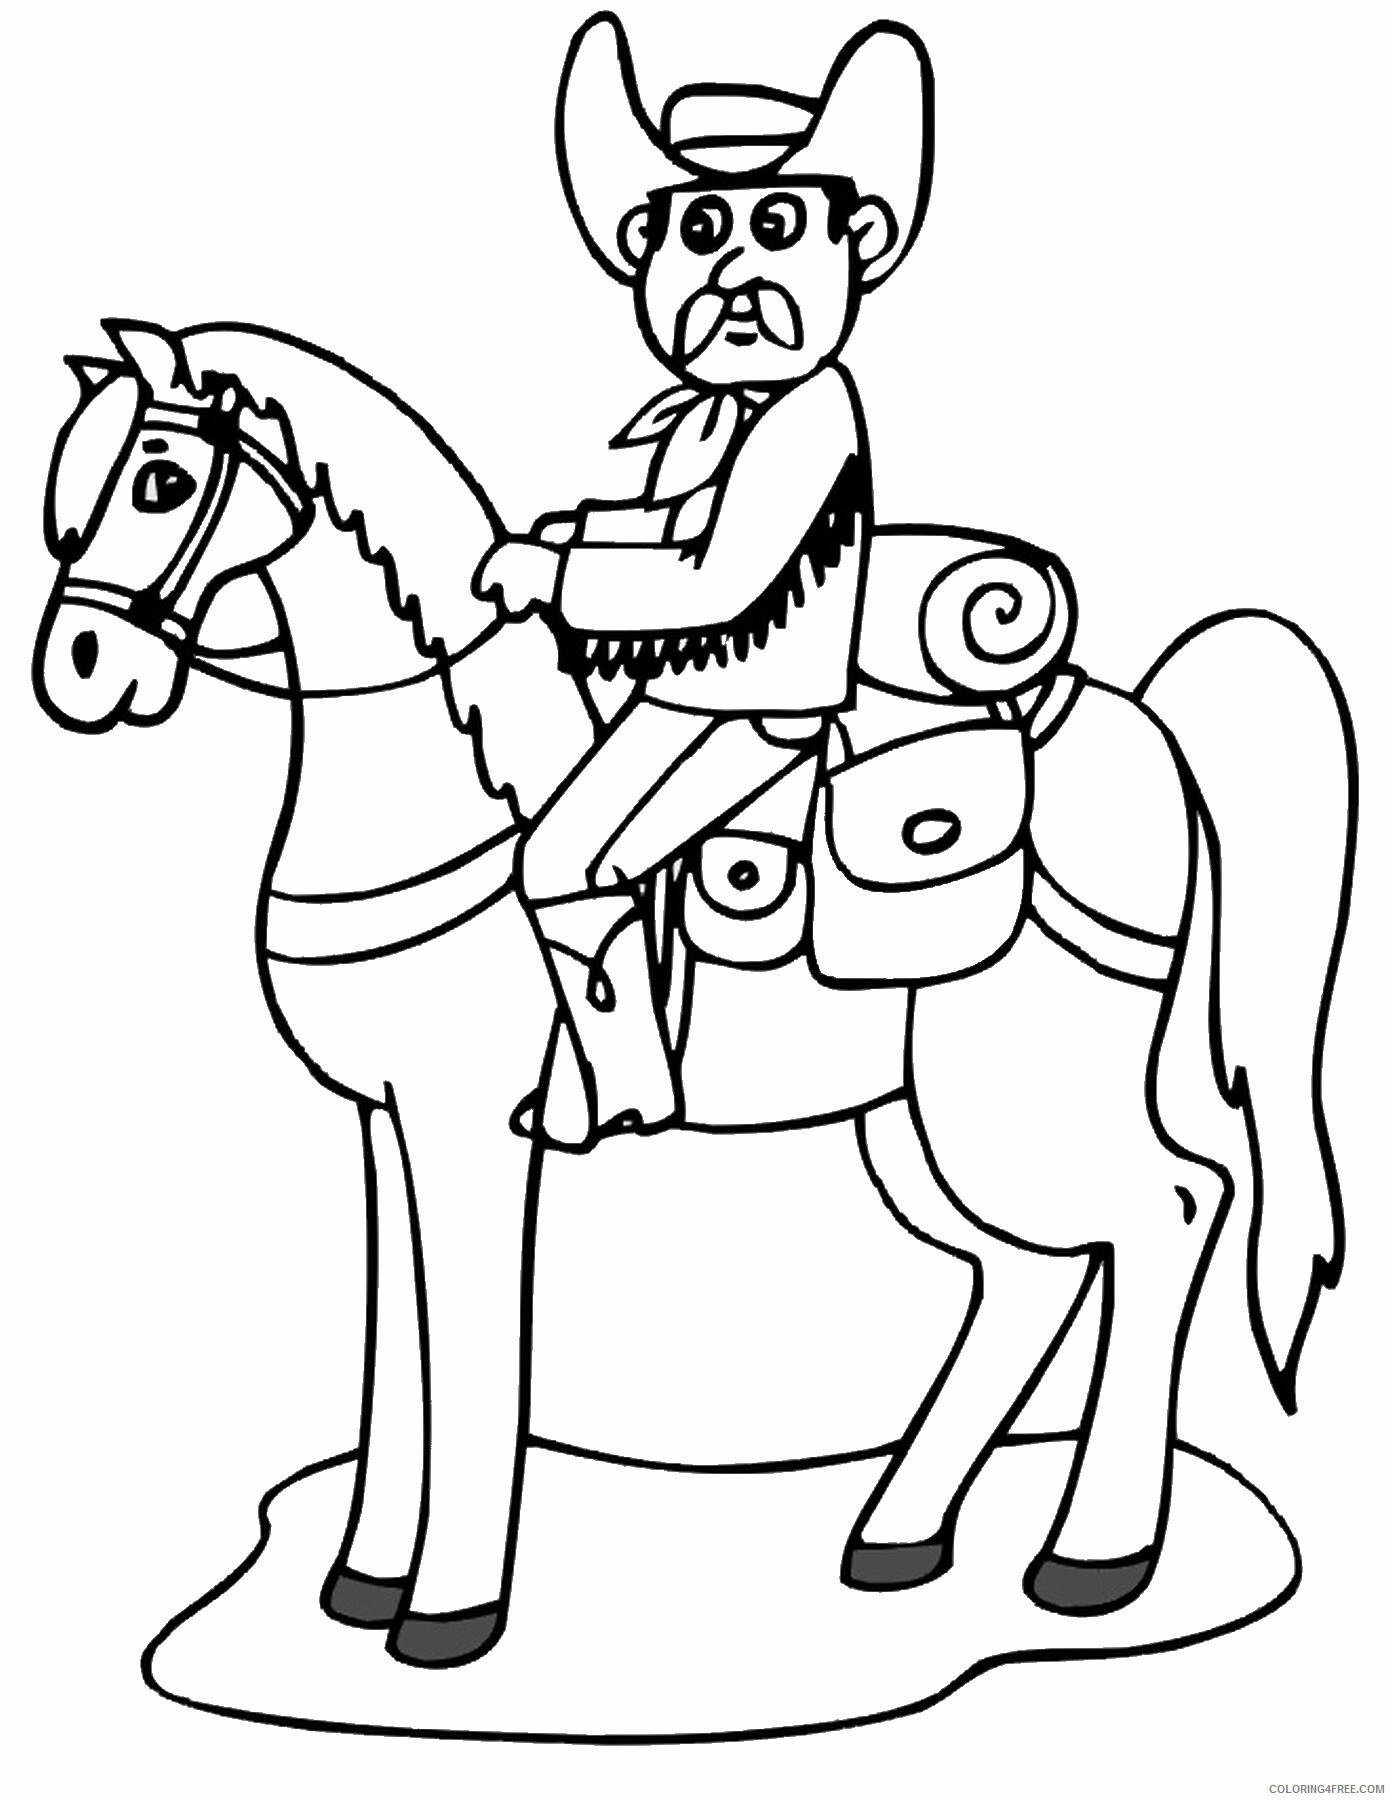 Cowboy Coloring Pages for boys cowboy_07 Printable 2020 0184 Coloring4free